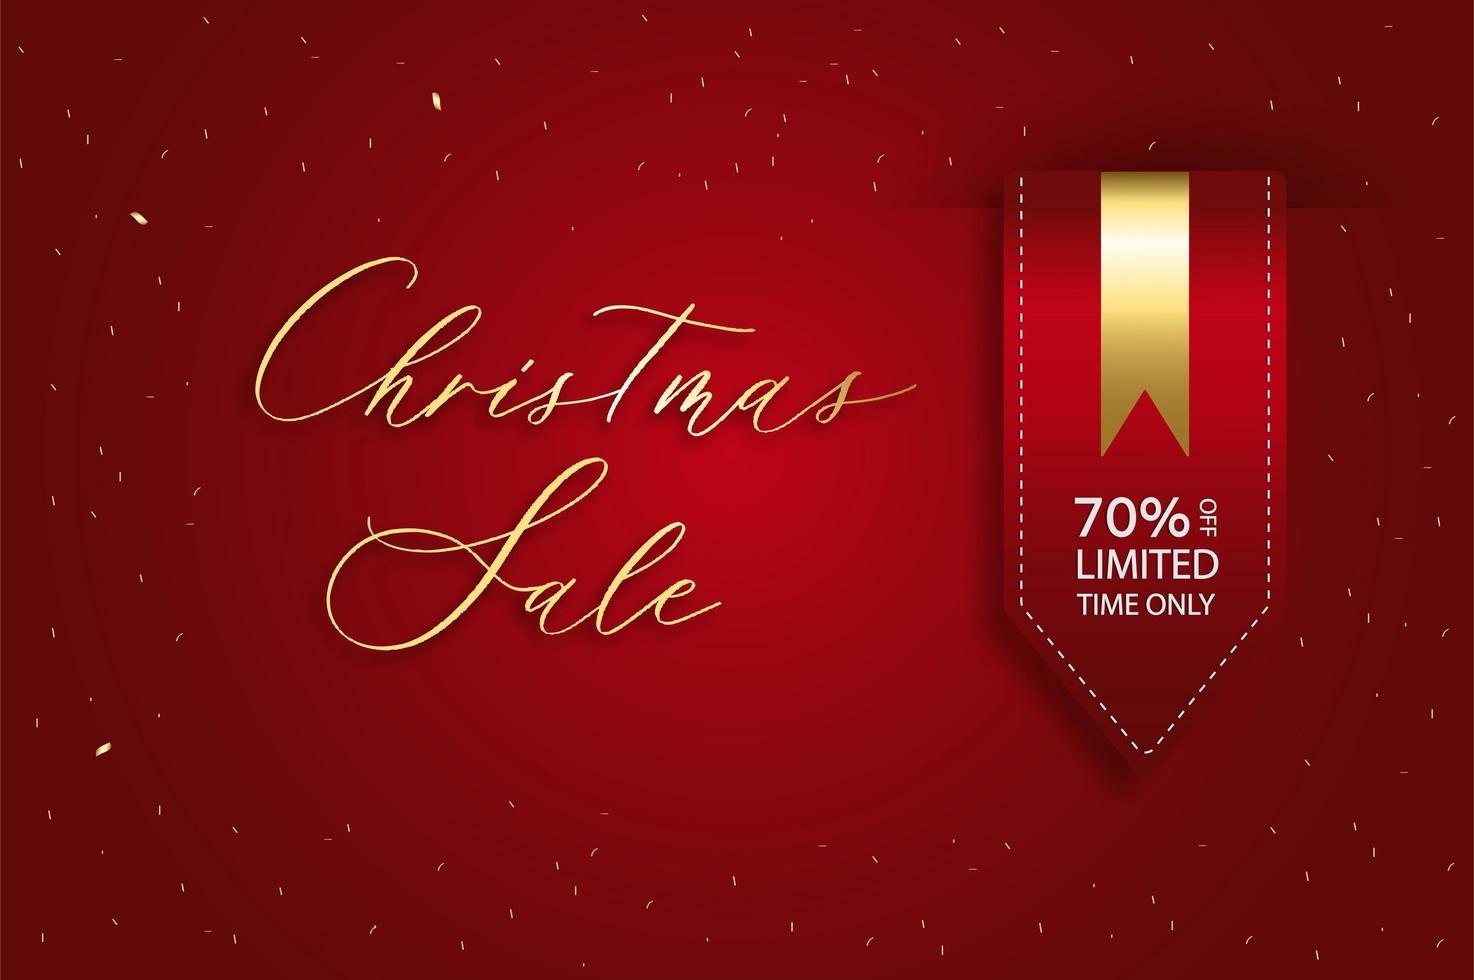 Christmas sale vector template background. Satin red ribbon price tag.